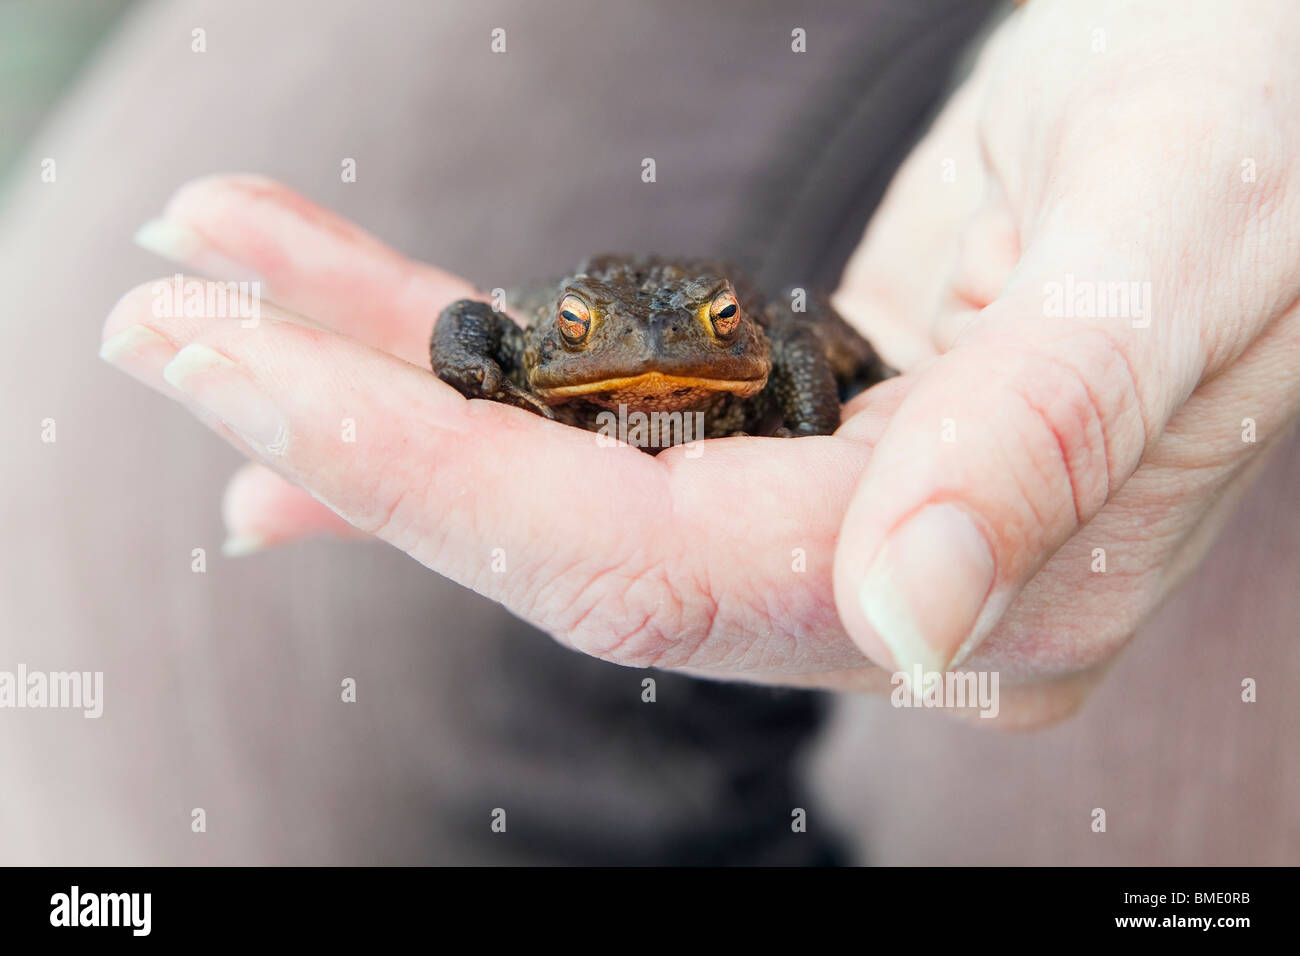 A common toad (bufo bufo) being held in a persons hand Stock Photo